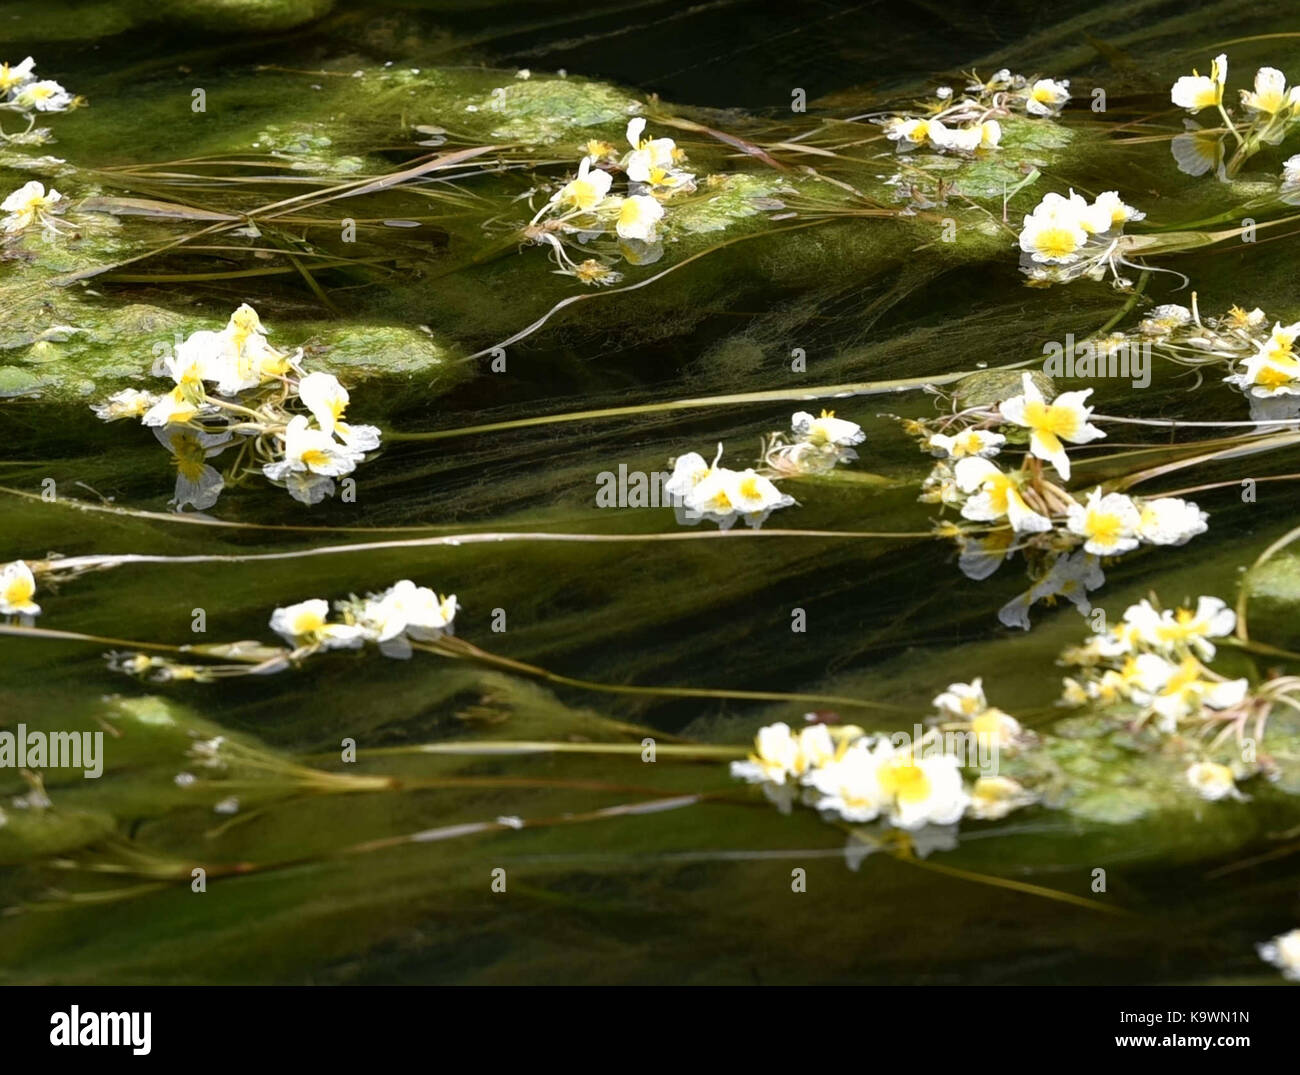 Beijing, China. 20th Sep, 2017. Photo taken on Sept. 20, 2017 shows the blooming ottelia acuminata on Chengjiang River in Du'an Yao Autonomous County, south China's Guangxi Zhuang Autonomous Region. Ottelia acuminata is an aquatic species endemic to China. Credit: Gao Dongfeng/Xinhua/Alamy Live News Stock Photo